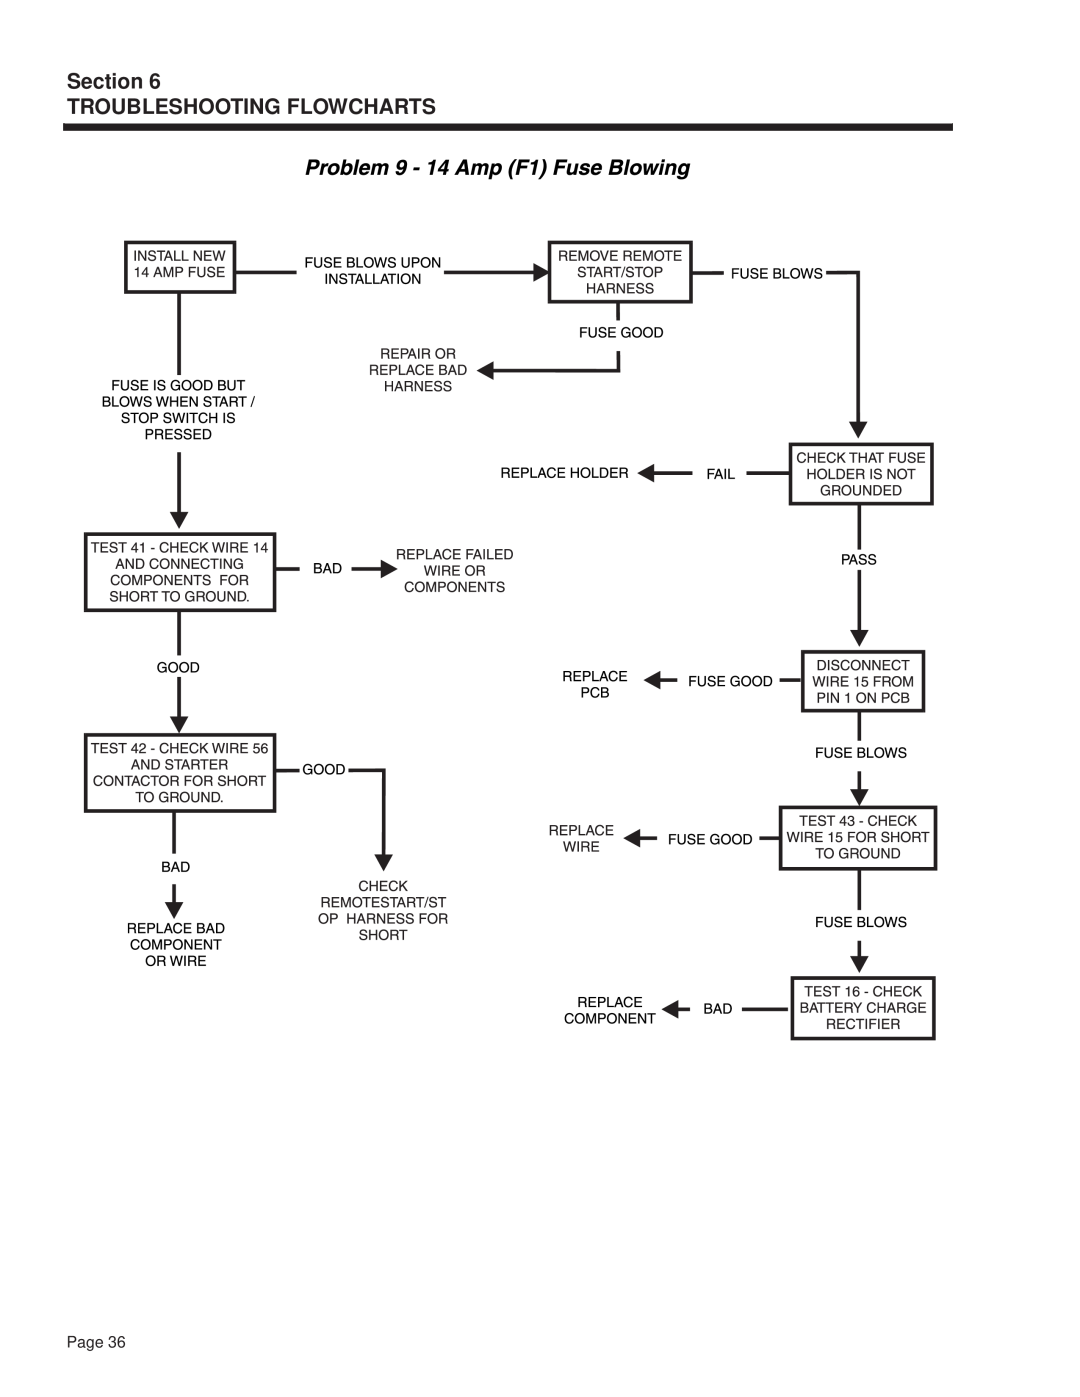 Guardian Technologies 4270 manual Section TROUBLESHOOTING FLOWCHARTS, Page 